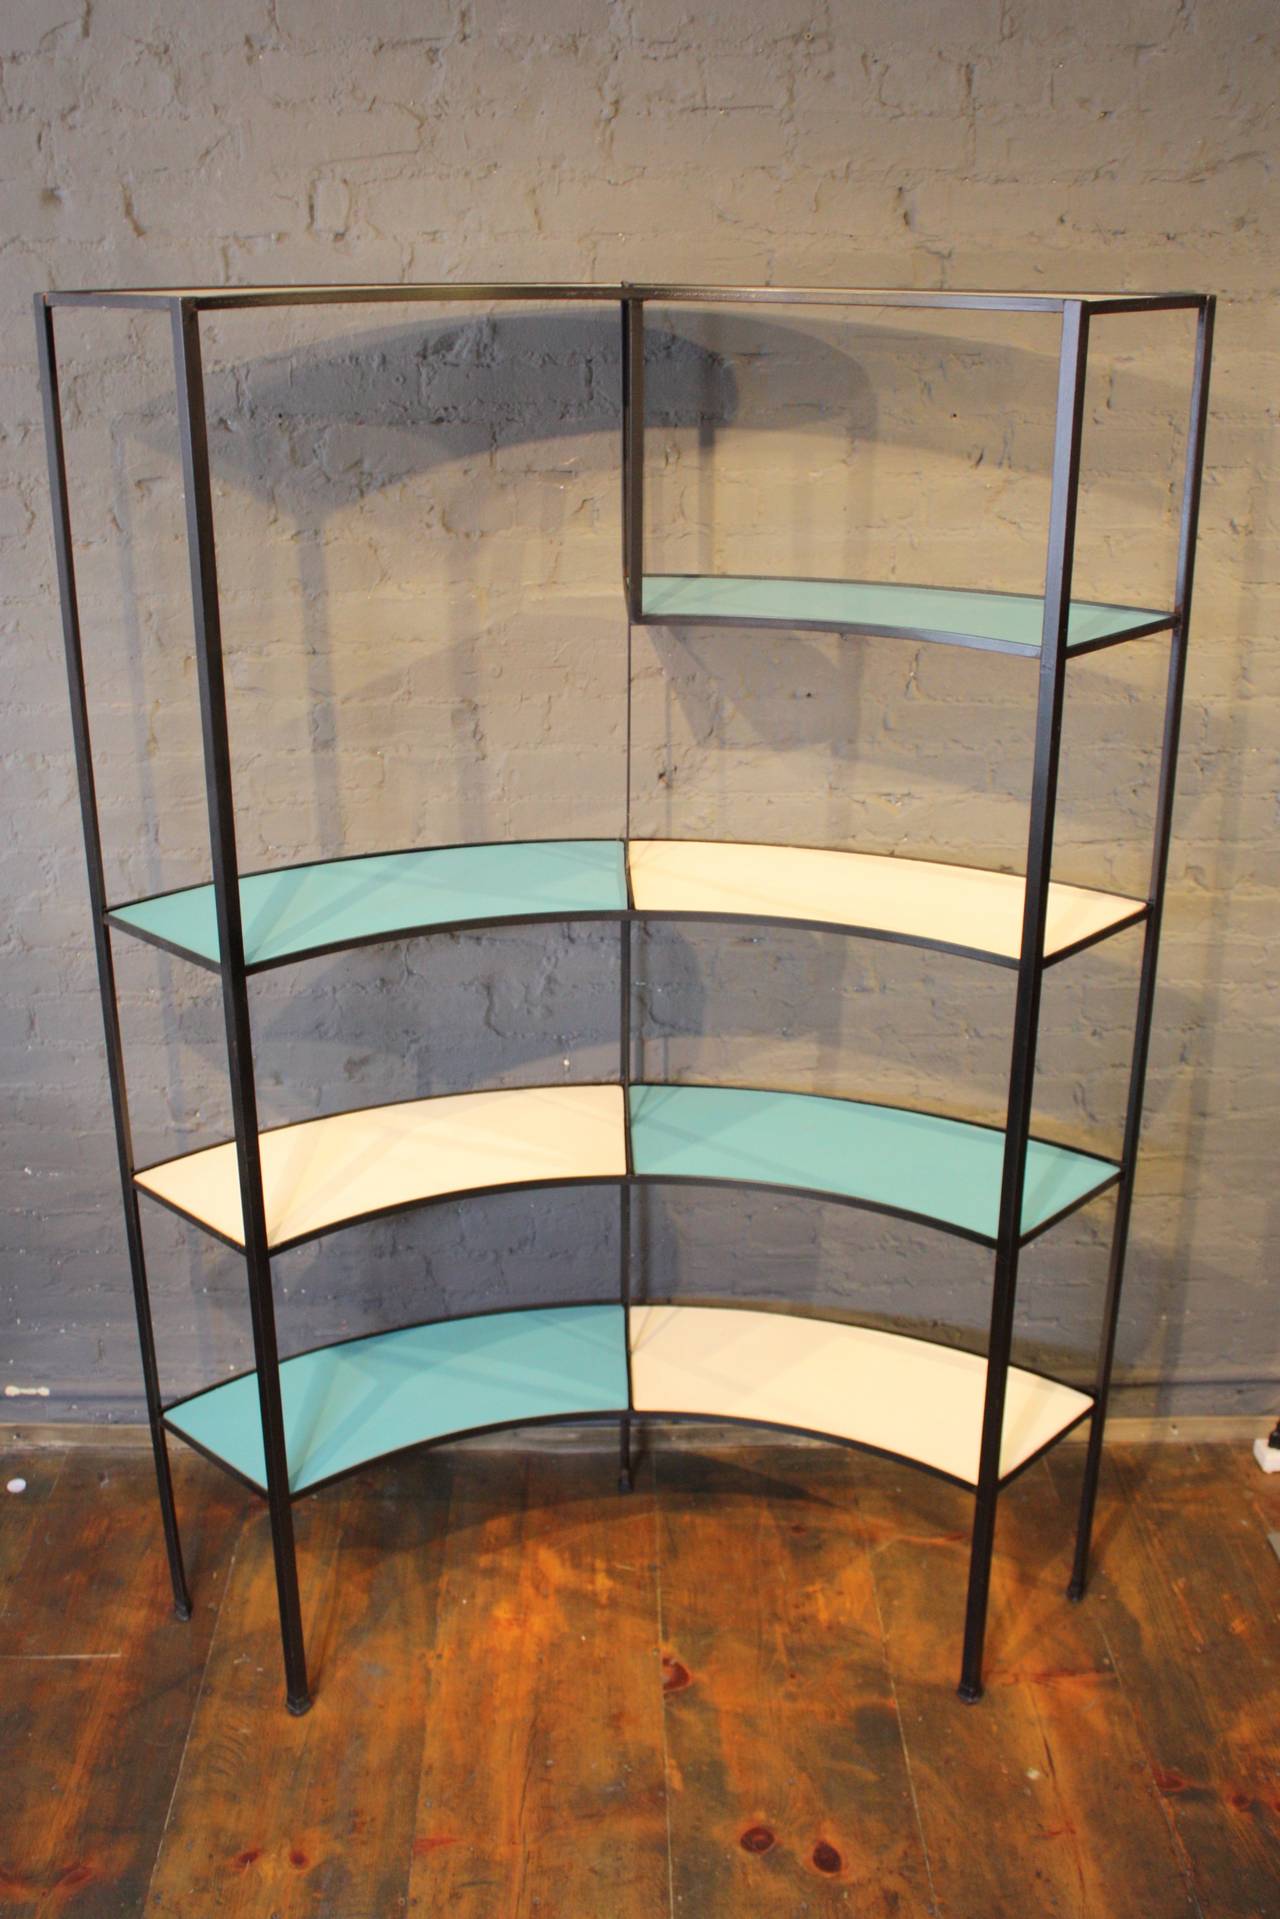 This rounded shelving unit was designed by Frederick Weinberg in the 1950s and is comprised of a wrought iron frame and blue and white masonite inserts.
There is age-appropriate wear to the original inserts (mostly to the edges where the iron meets